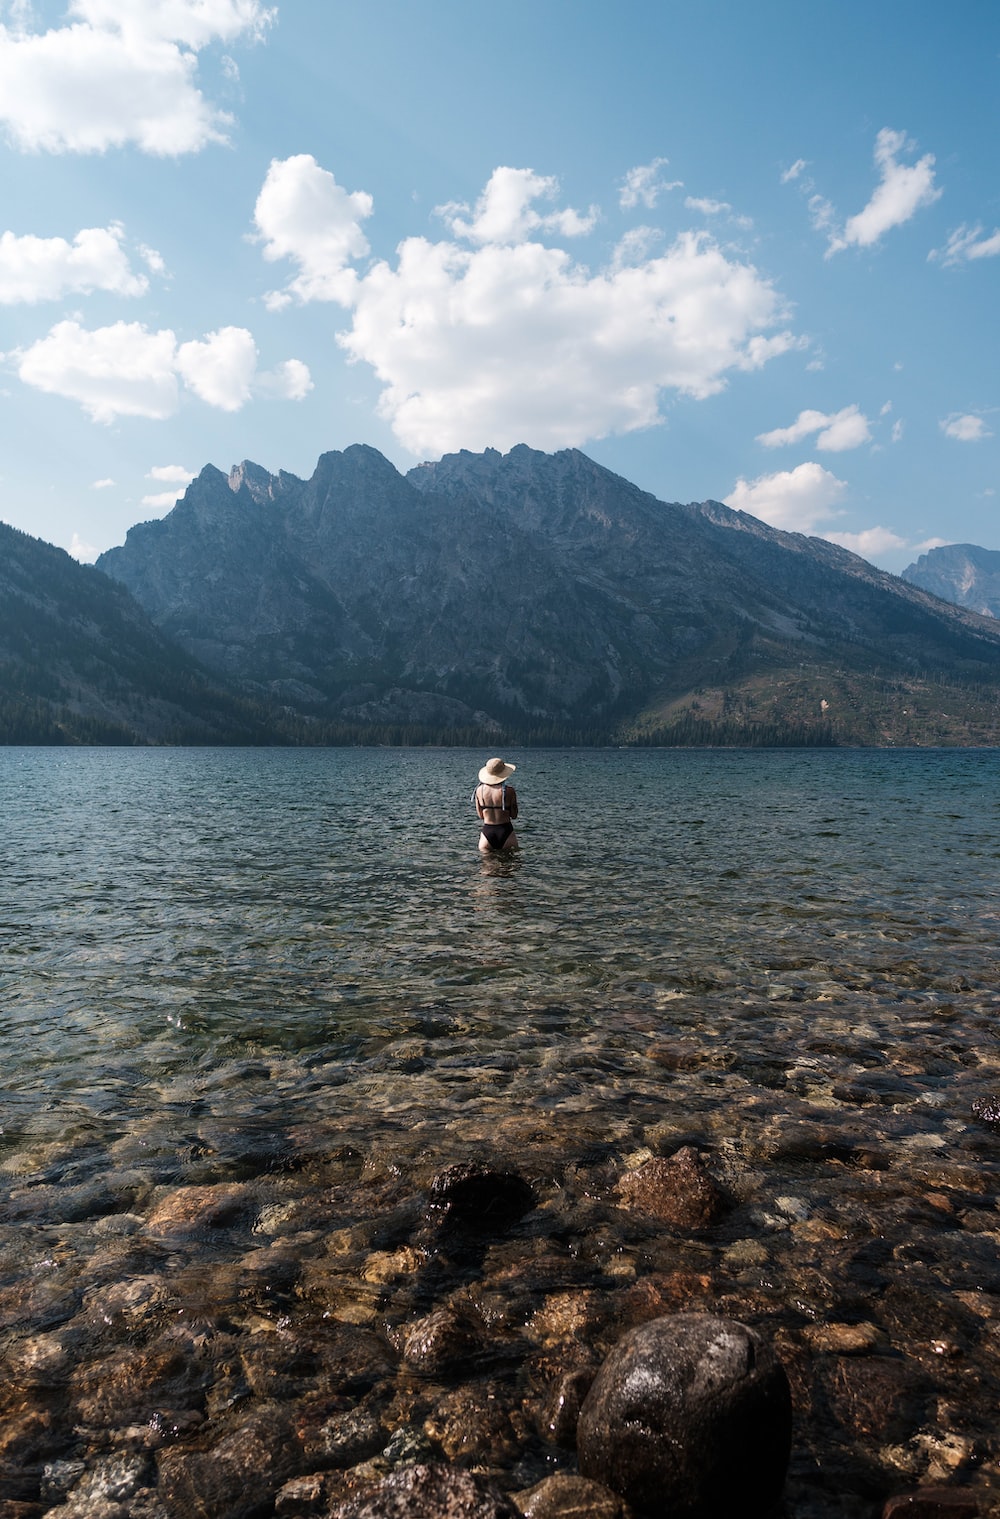 a man wading in a lake with mountains in the background